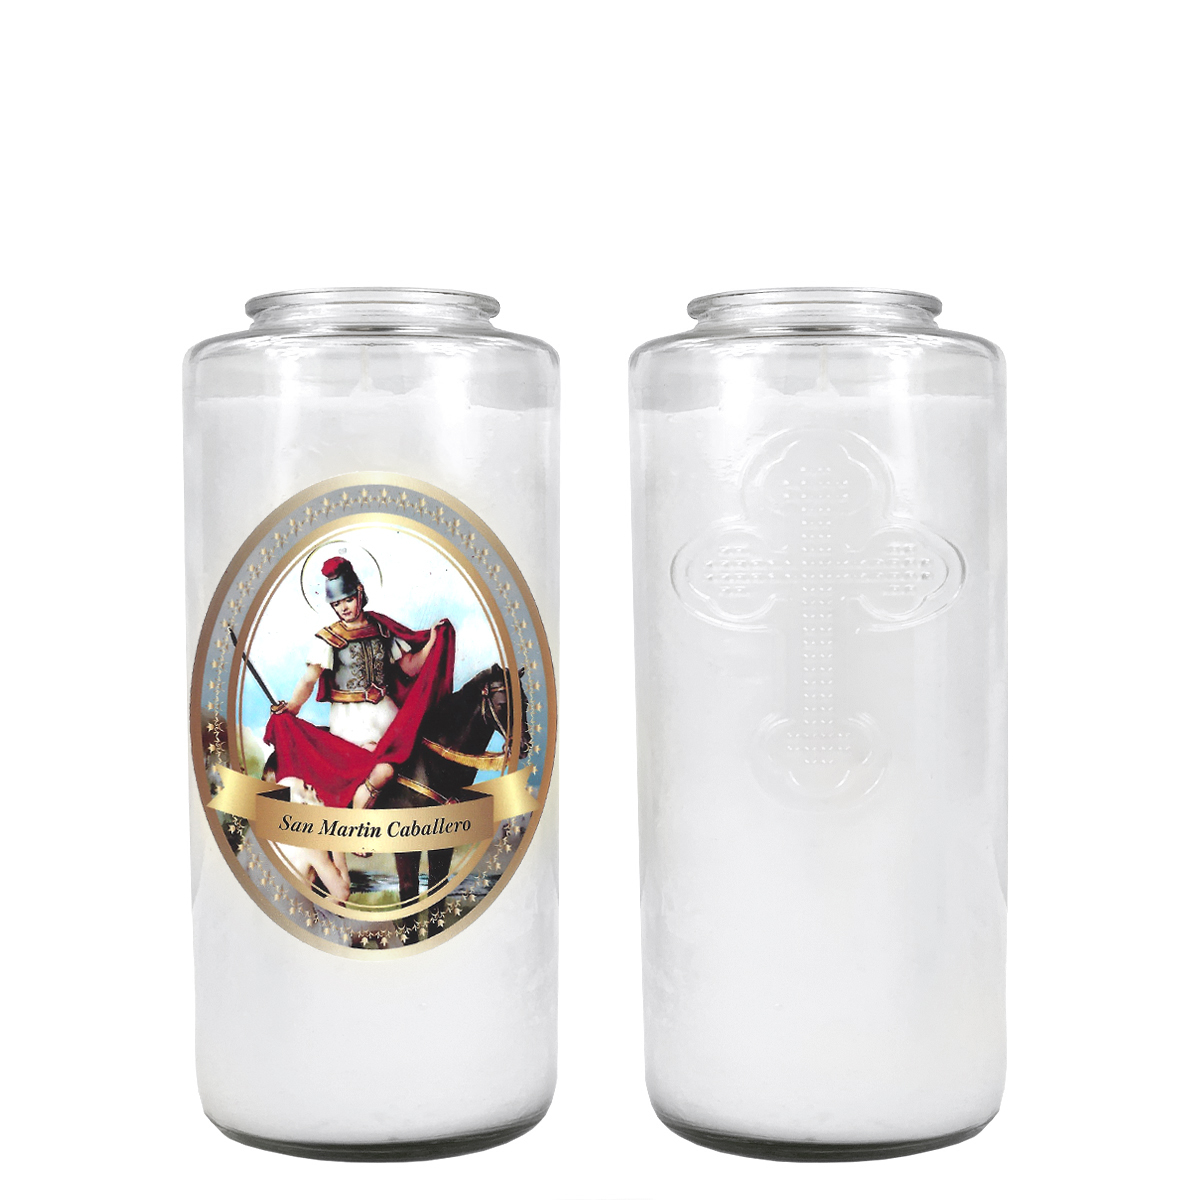 SAN MARTIN CABALLERO 3 DAY CANDLE W/ REMOVABLE LABEL